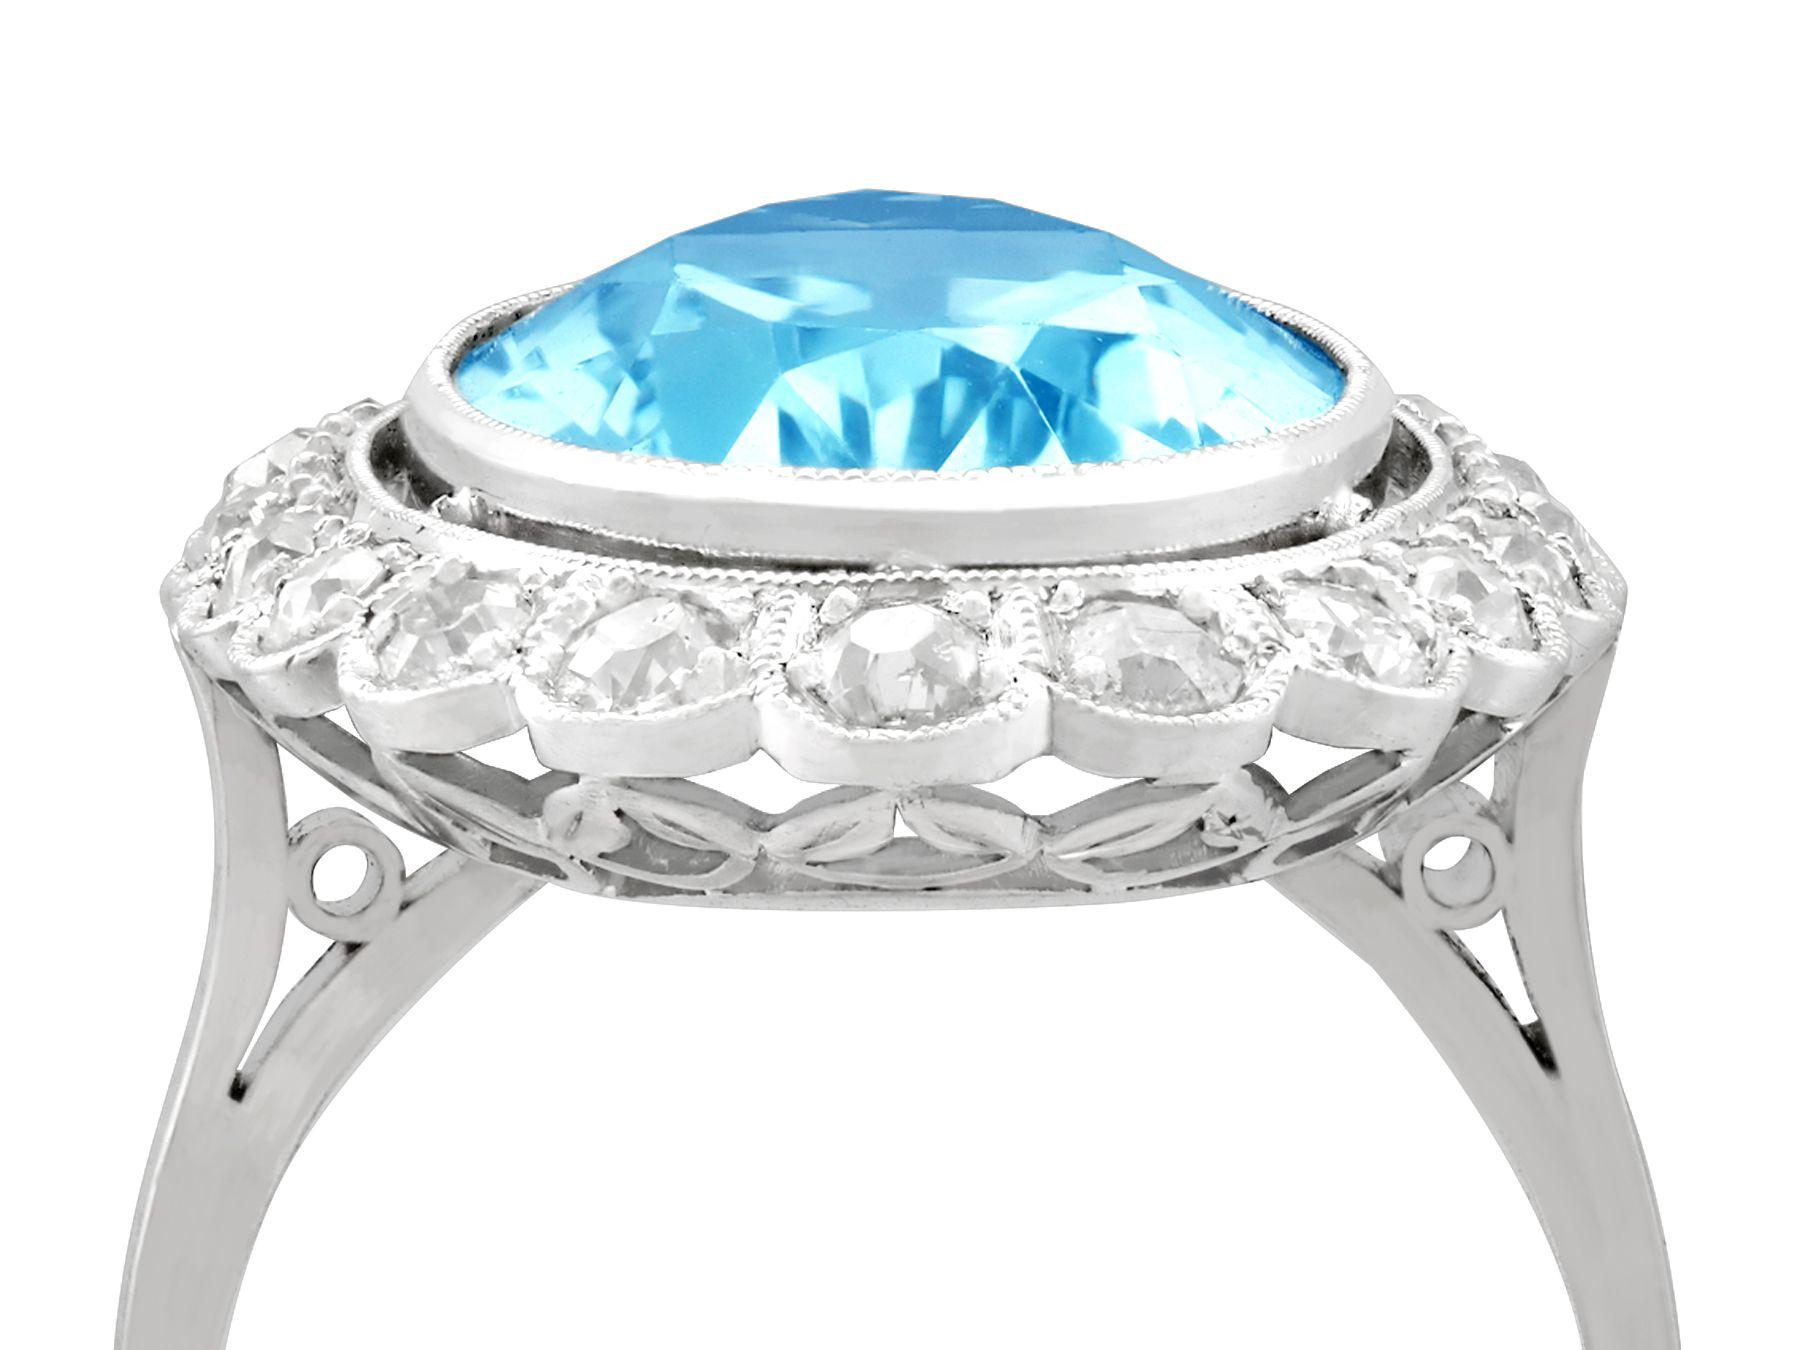 A stunning antique 1930s 7.28 carat aquamarine and 1.30 carat diamond, platinum dress ring; part of our diverse antique jewelry and estate jewelry collections.

This stunning, fine and impressive antique aquamarine ring has been crafted in